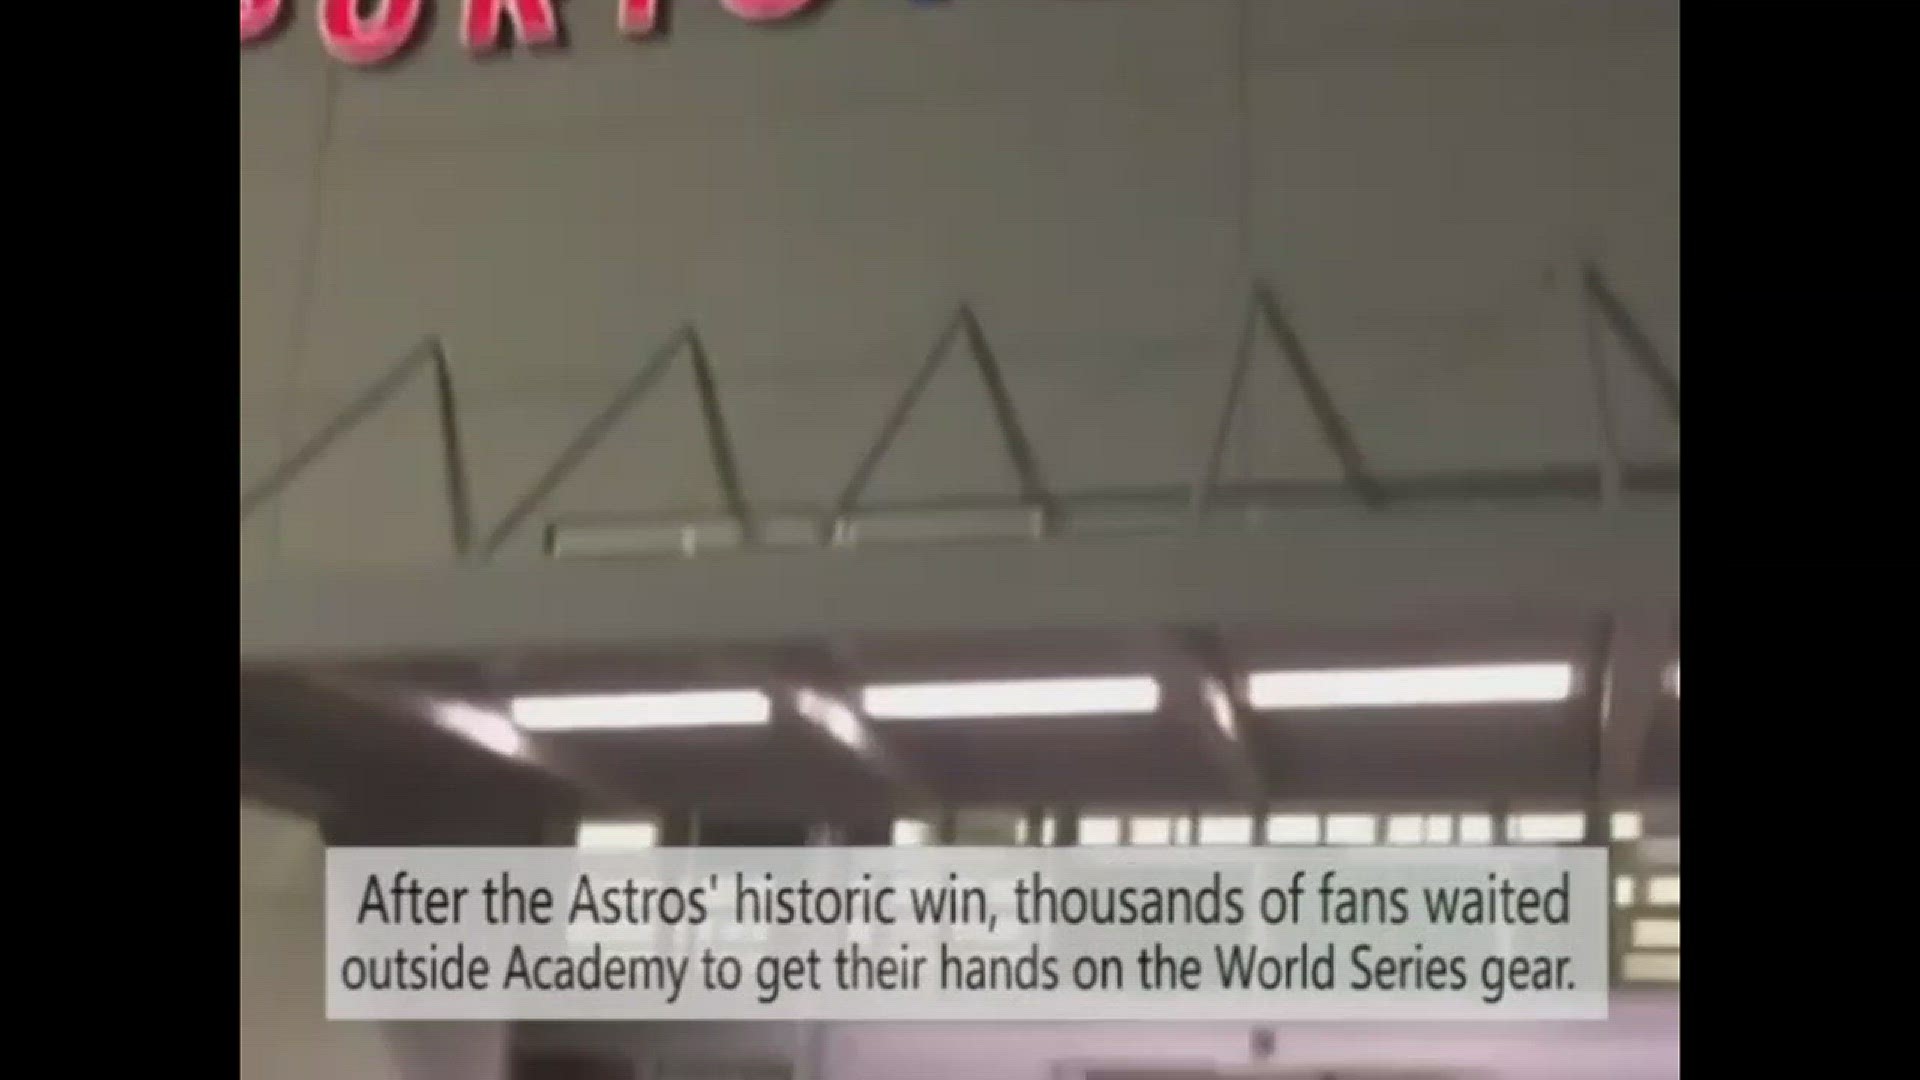 Astros fans crowded a Houston Academy store in hopes of being the first to snag historical World Series merch.